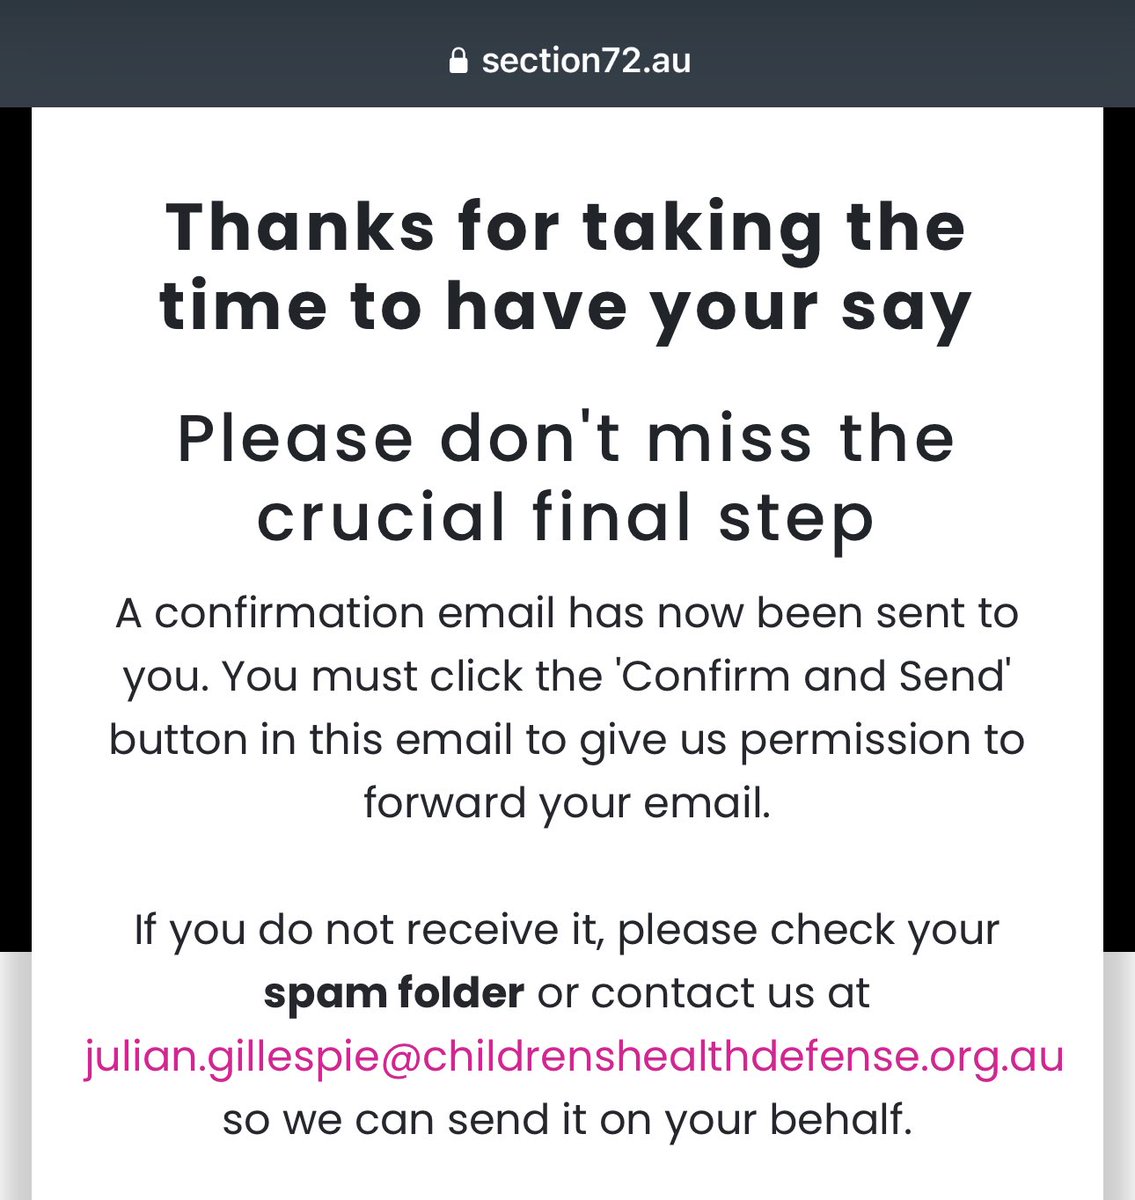 All Australians who aren’t happy Justice Rofe failed to mention she had acted for Pfizer on at least 5 occasions. Failure to mention this key information gives rise to an allegation of bias, especially when her Honour decided the GMO case in Pfizer's favour, need to complain 👇🏼